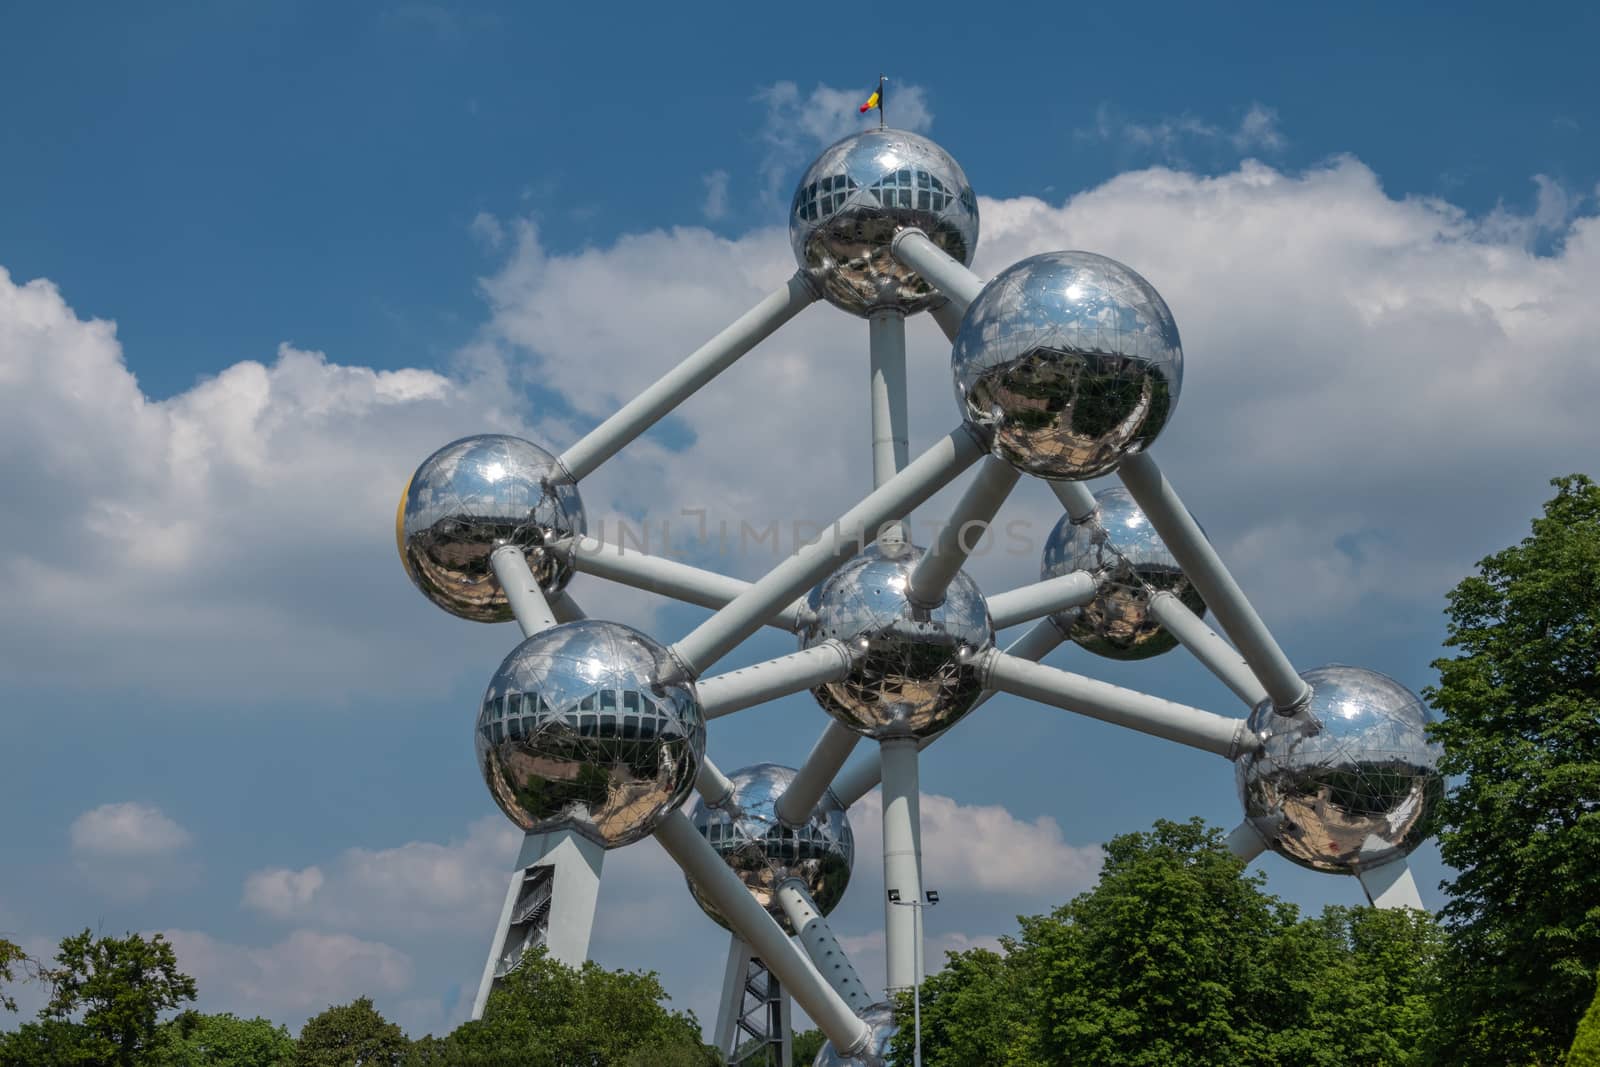 Brussels, Belgium - June 22, 2019: Atomium monument with its silver balls and pipes against blue sky with white cloudscape and green foliage on bottom.